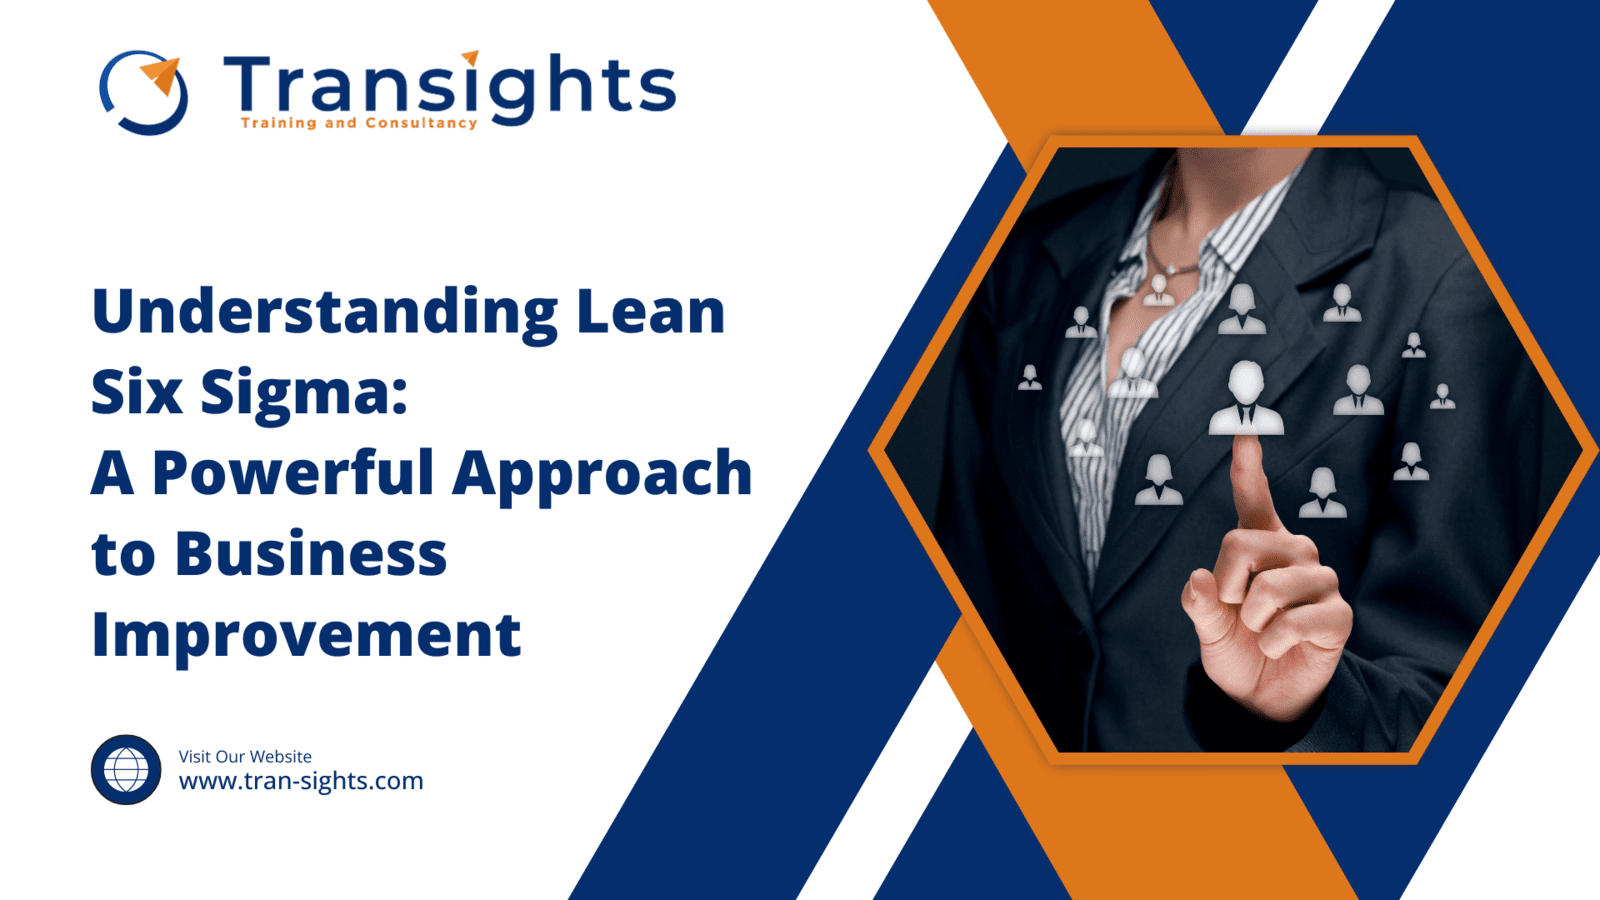 Understanding Lean Six Sigma: A Powerful Approach to Business Improvement